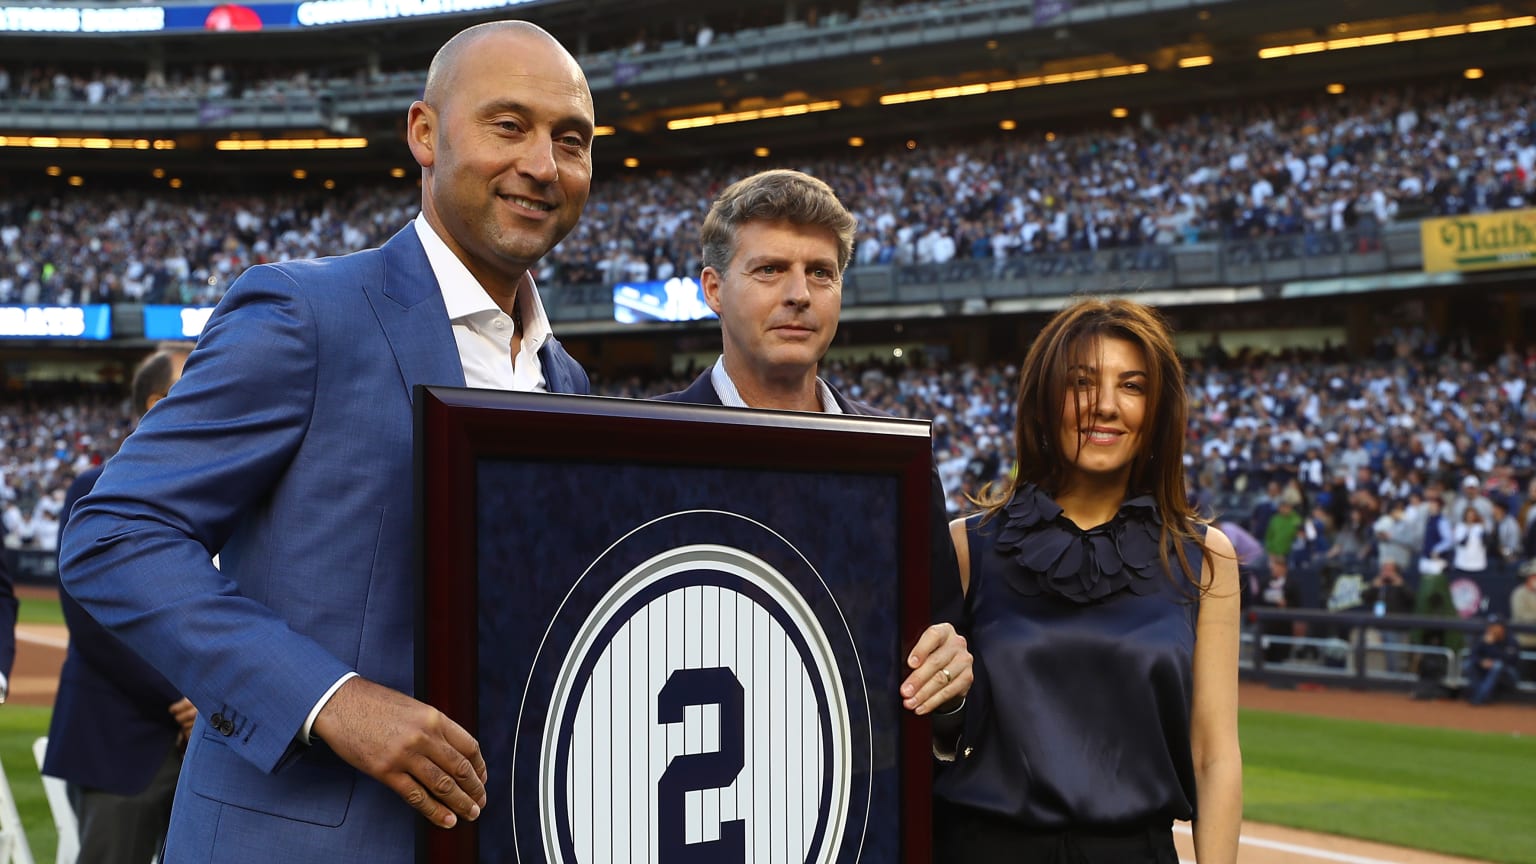 New York Yankees: The Numbers on the Wall